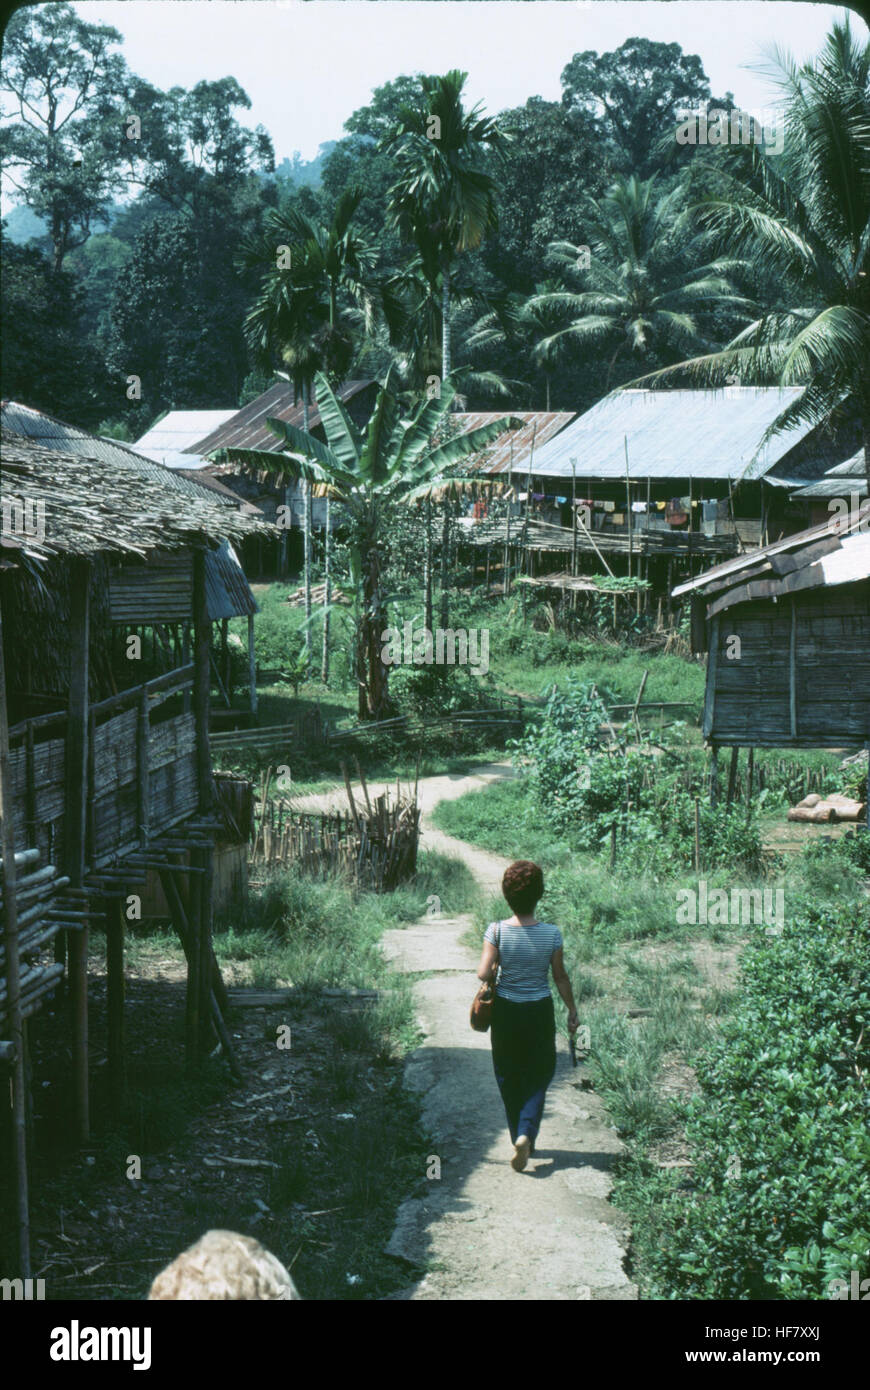 Settlement of Dayak people, Longhouses; Kuching area, Sarawak, Malaysia.  Many Dayak people believe in nature spirits, therefore spirit offerings in the woods. Stock Photo